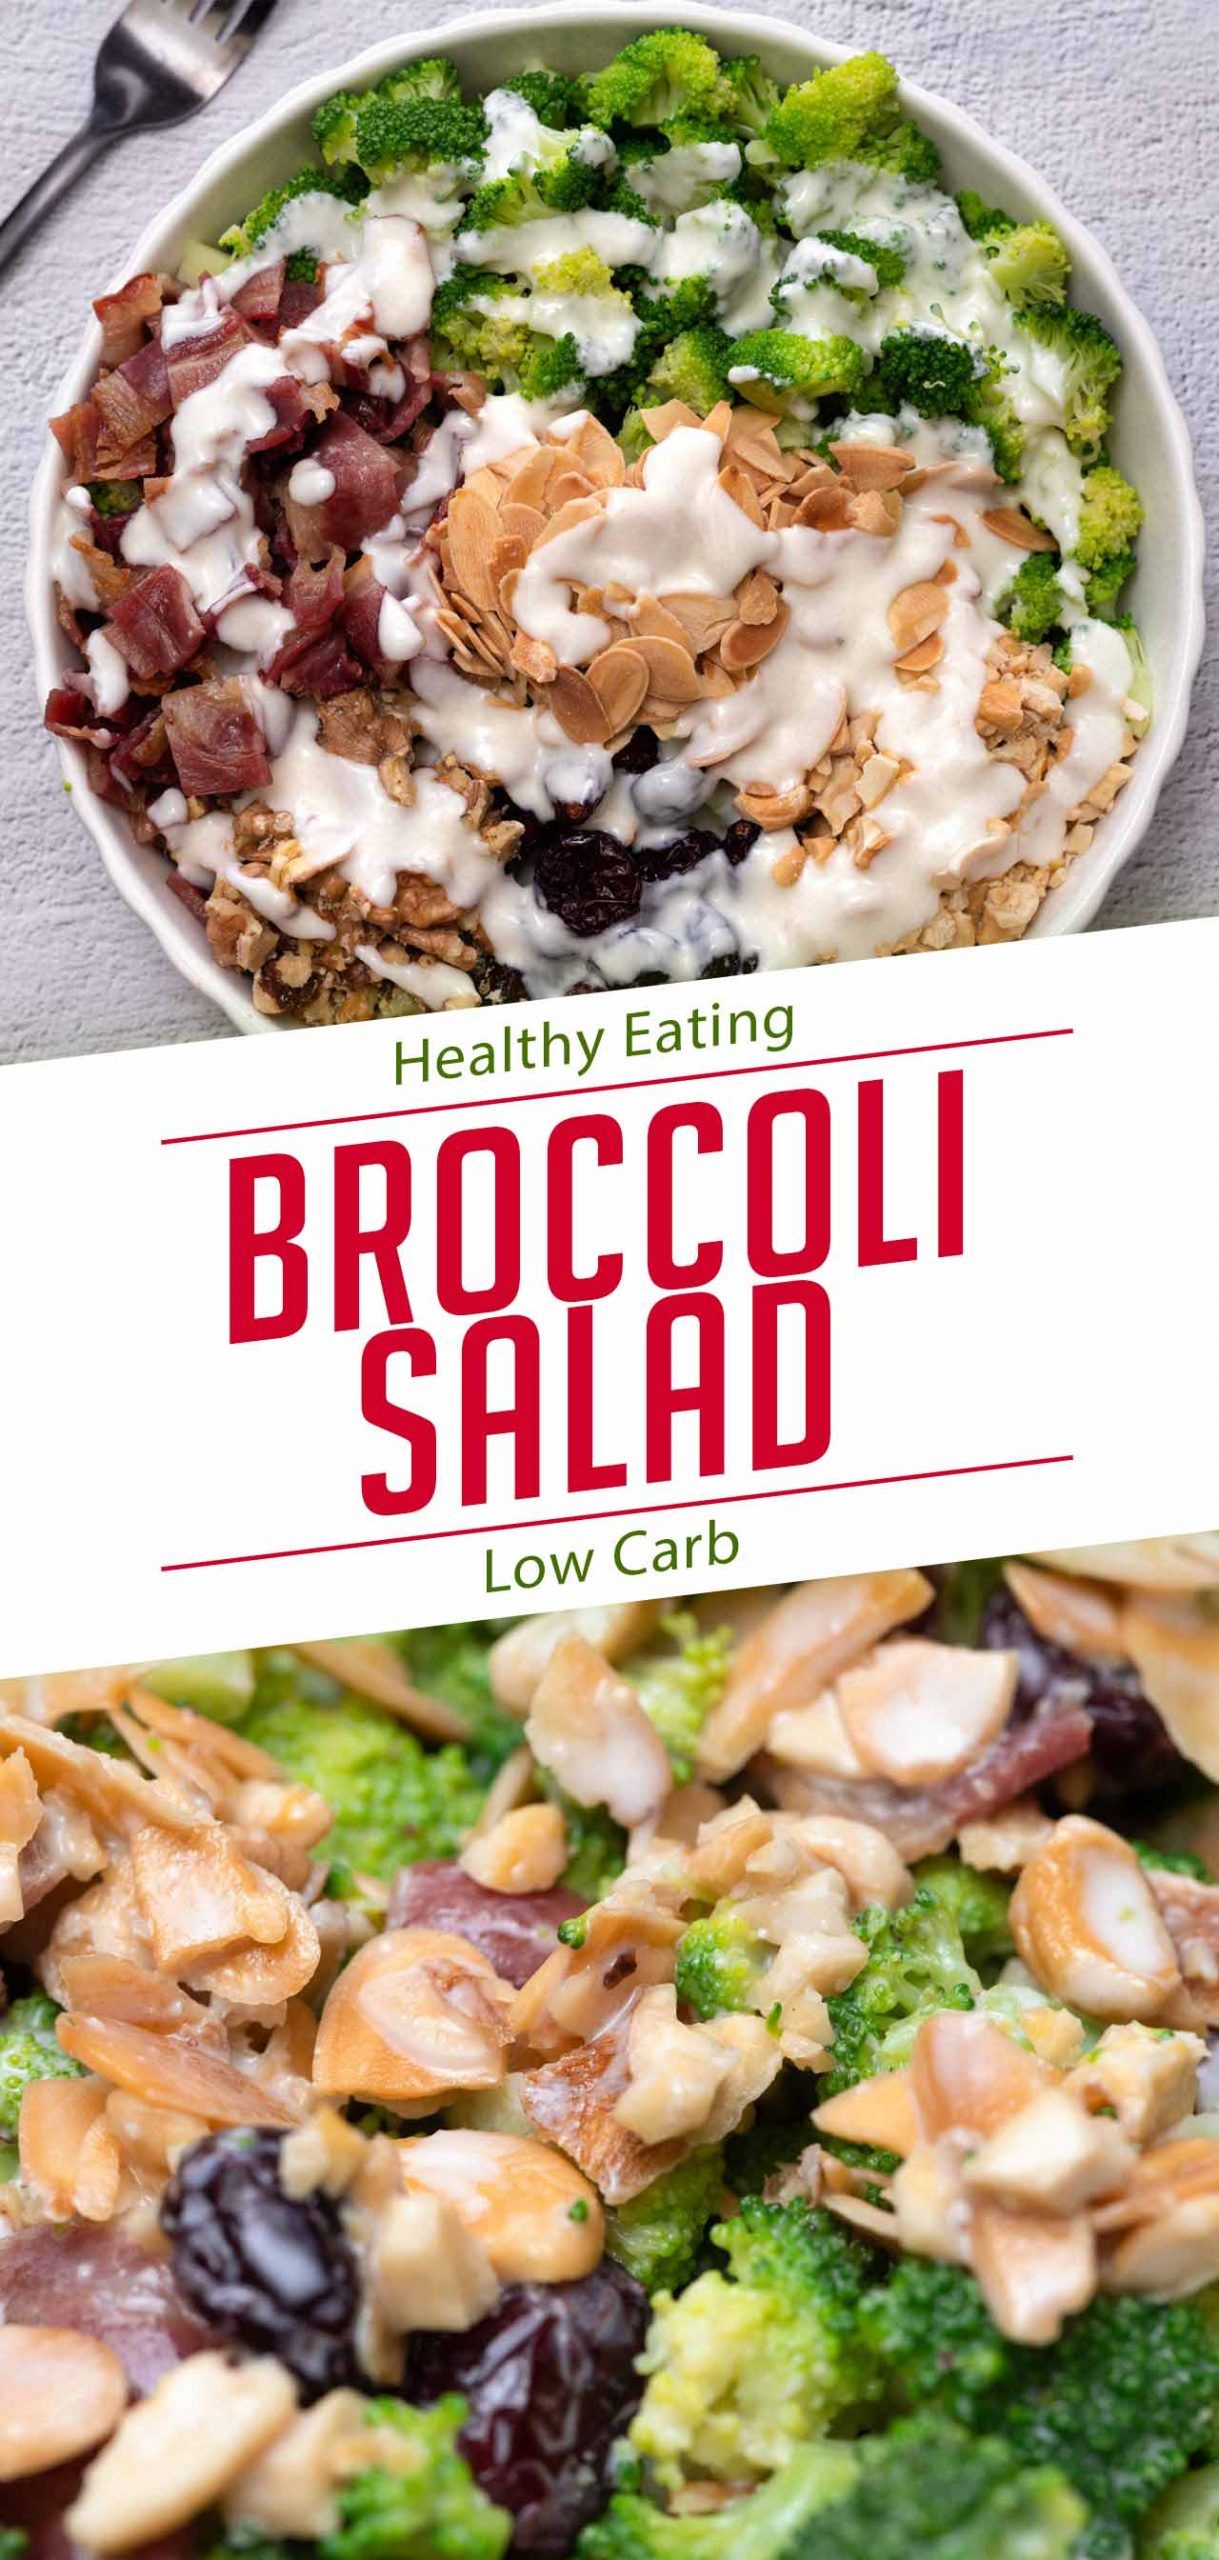 Easy broccoli salad recipe: A healthy eating meal prep idea for your kids